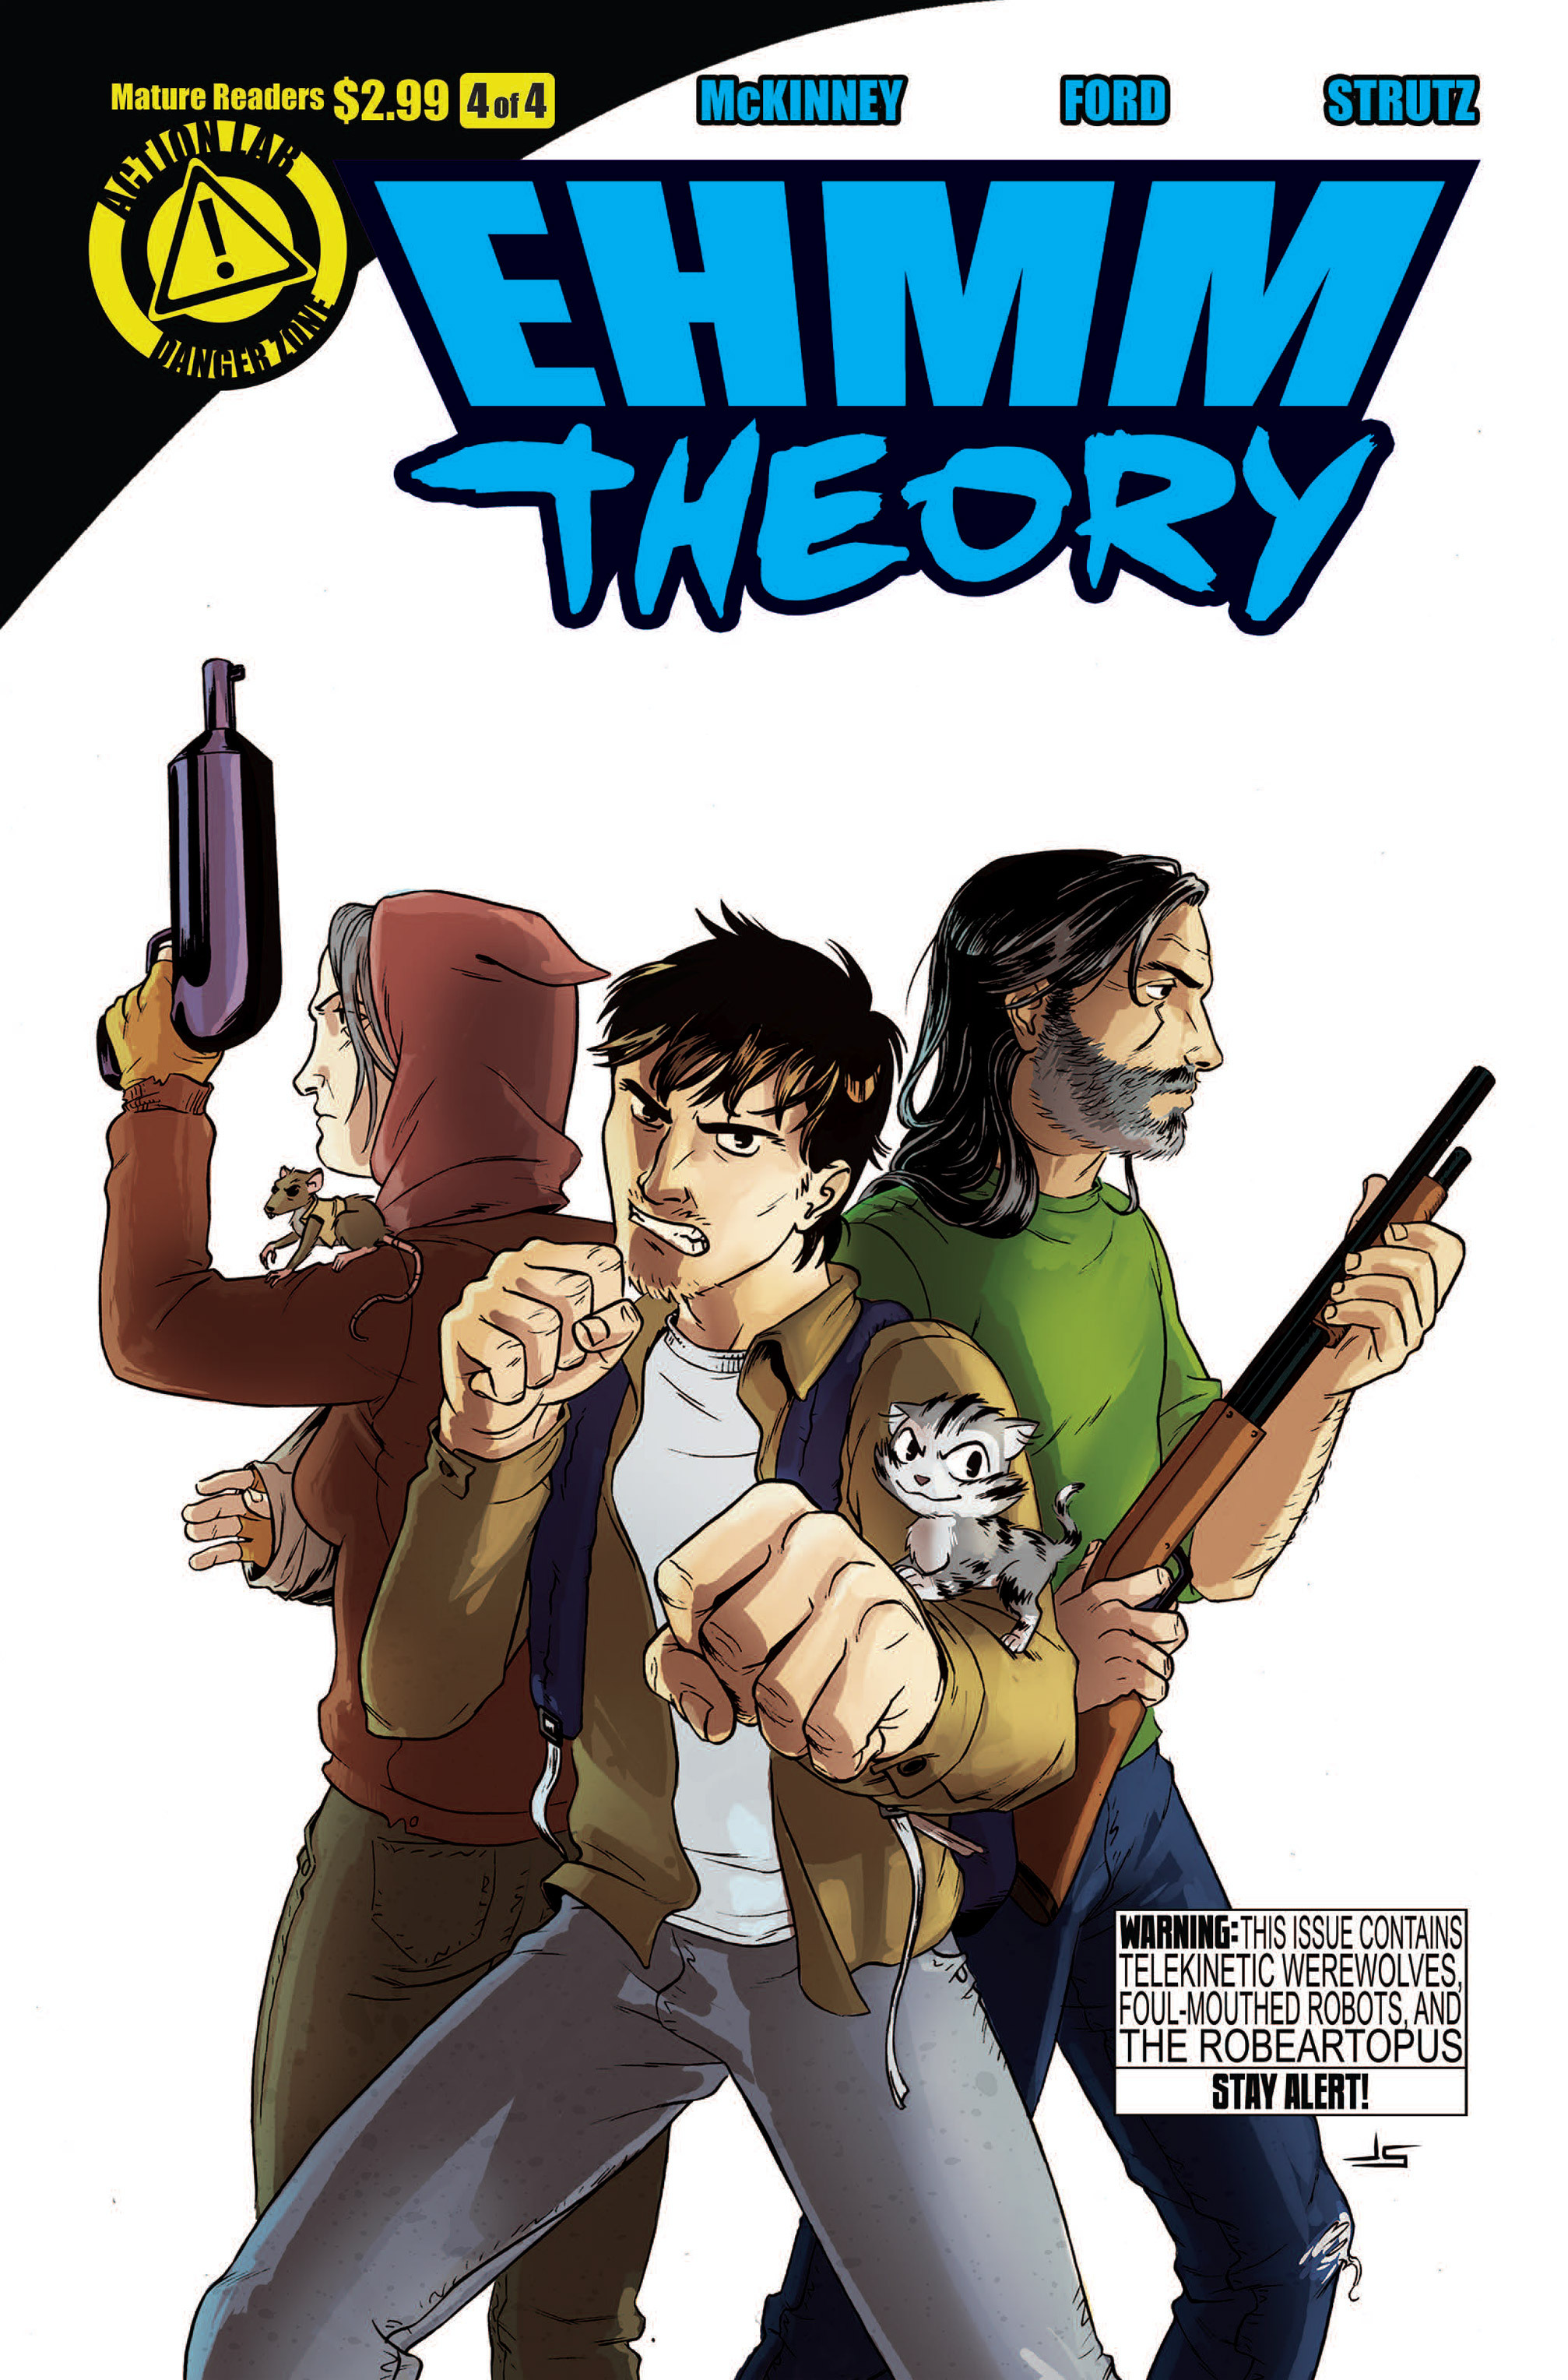 Read online Ehmm Theory comic -  Issue #4 - 1